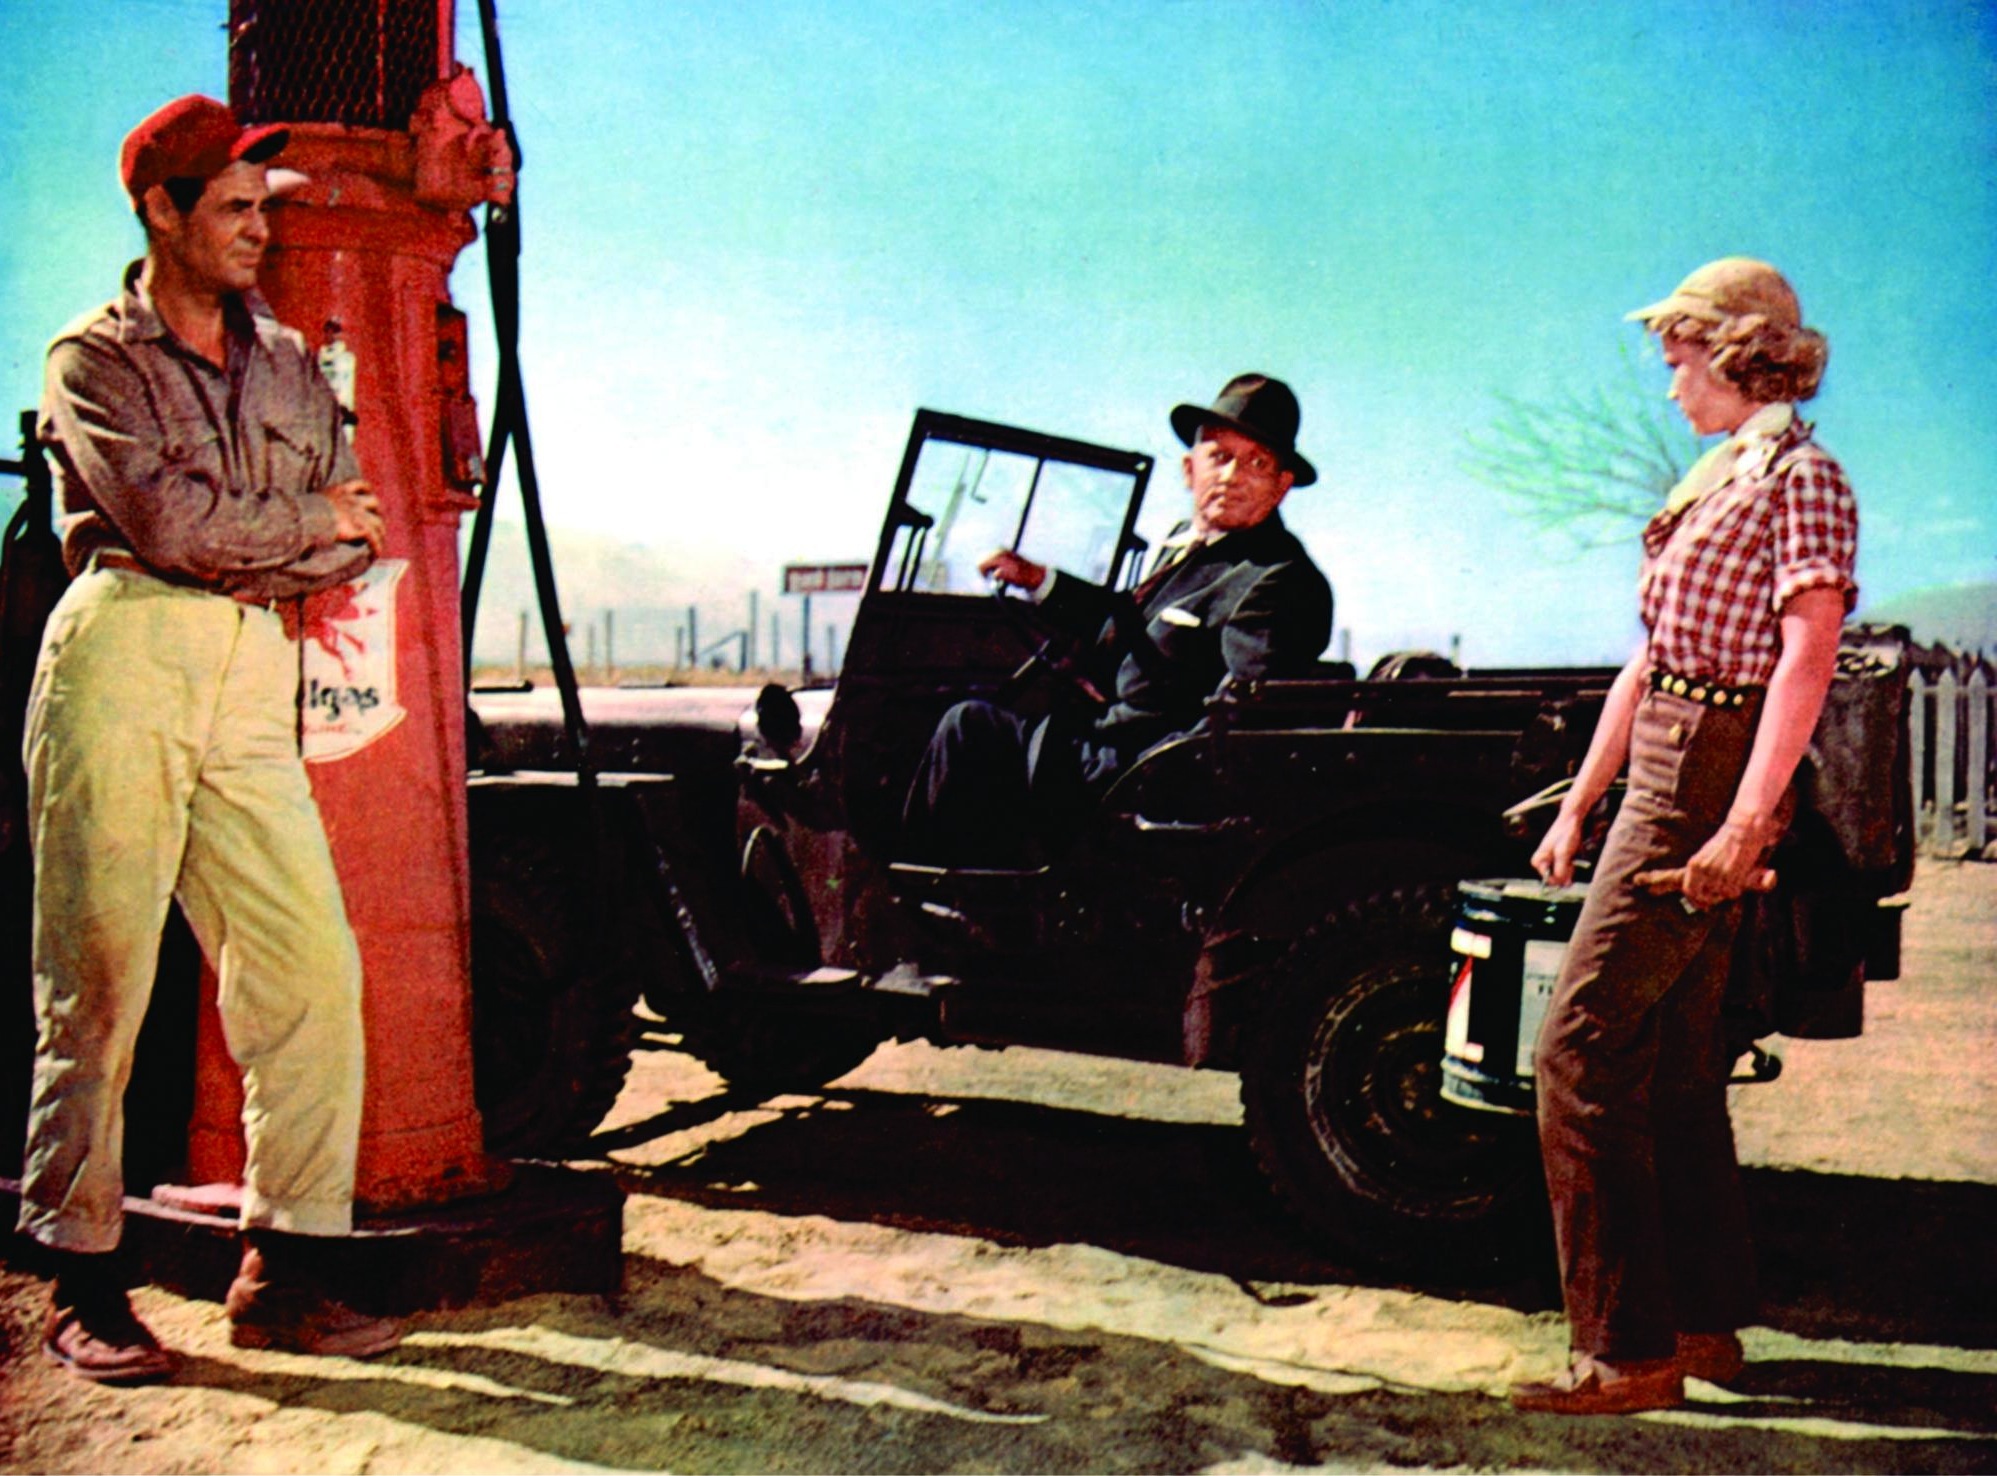 Still of Spencer Tracy and Robert Ryan in Bad Day at Black Rock (1955)